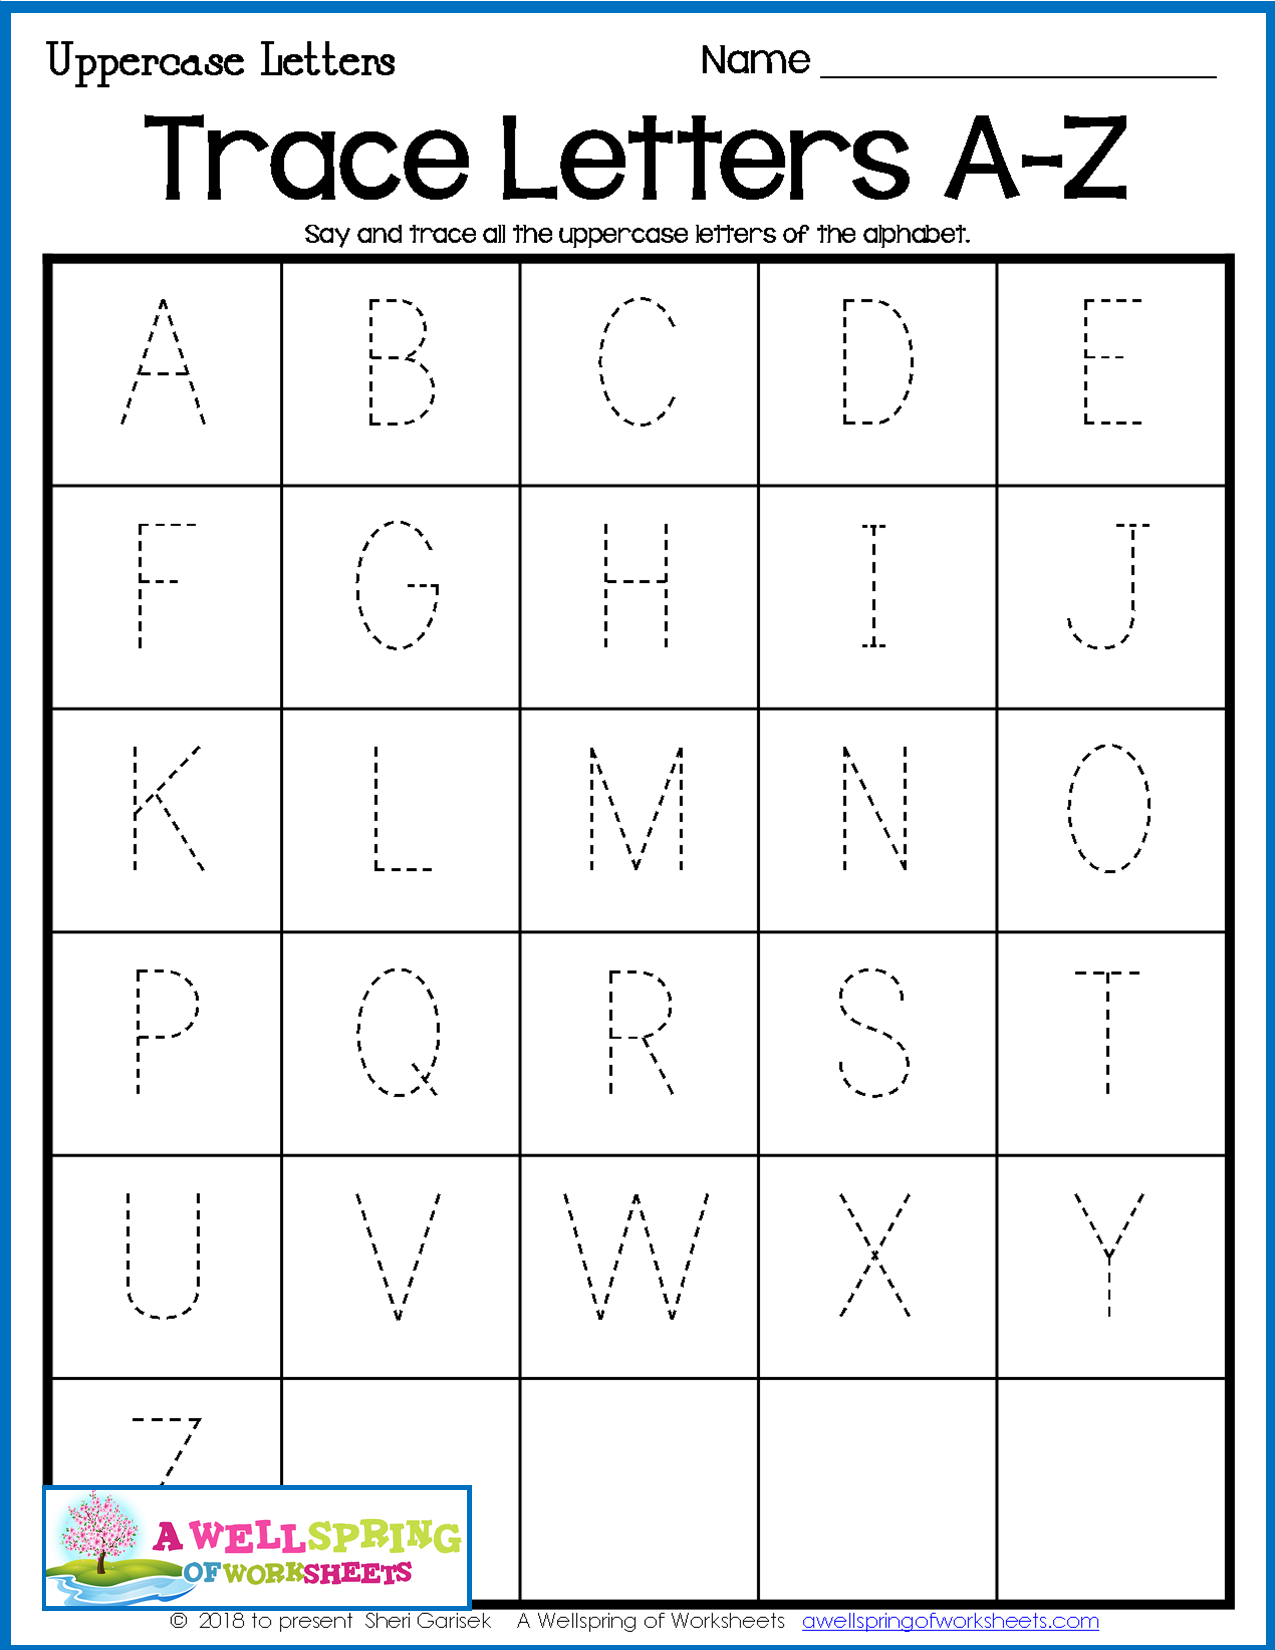 Alphabet Tracing Worksheets - Uppercase &amp;amp; Lowercase Letters regarding Alphabet Tracing Worksheets Capital Letters